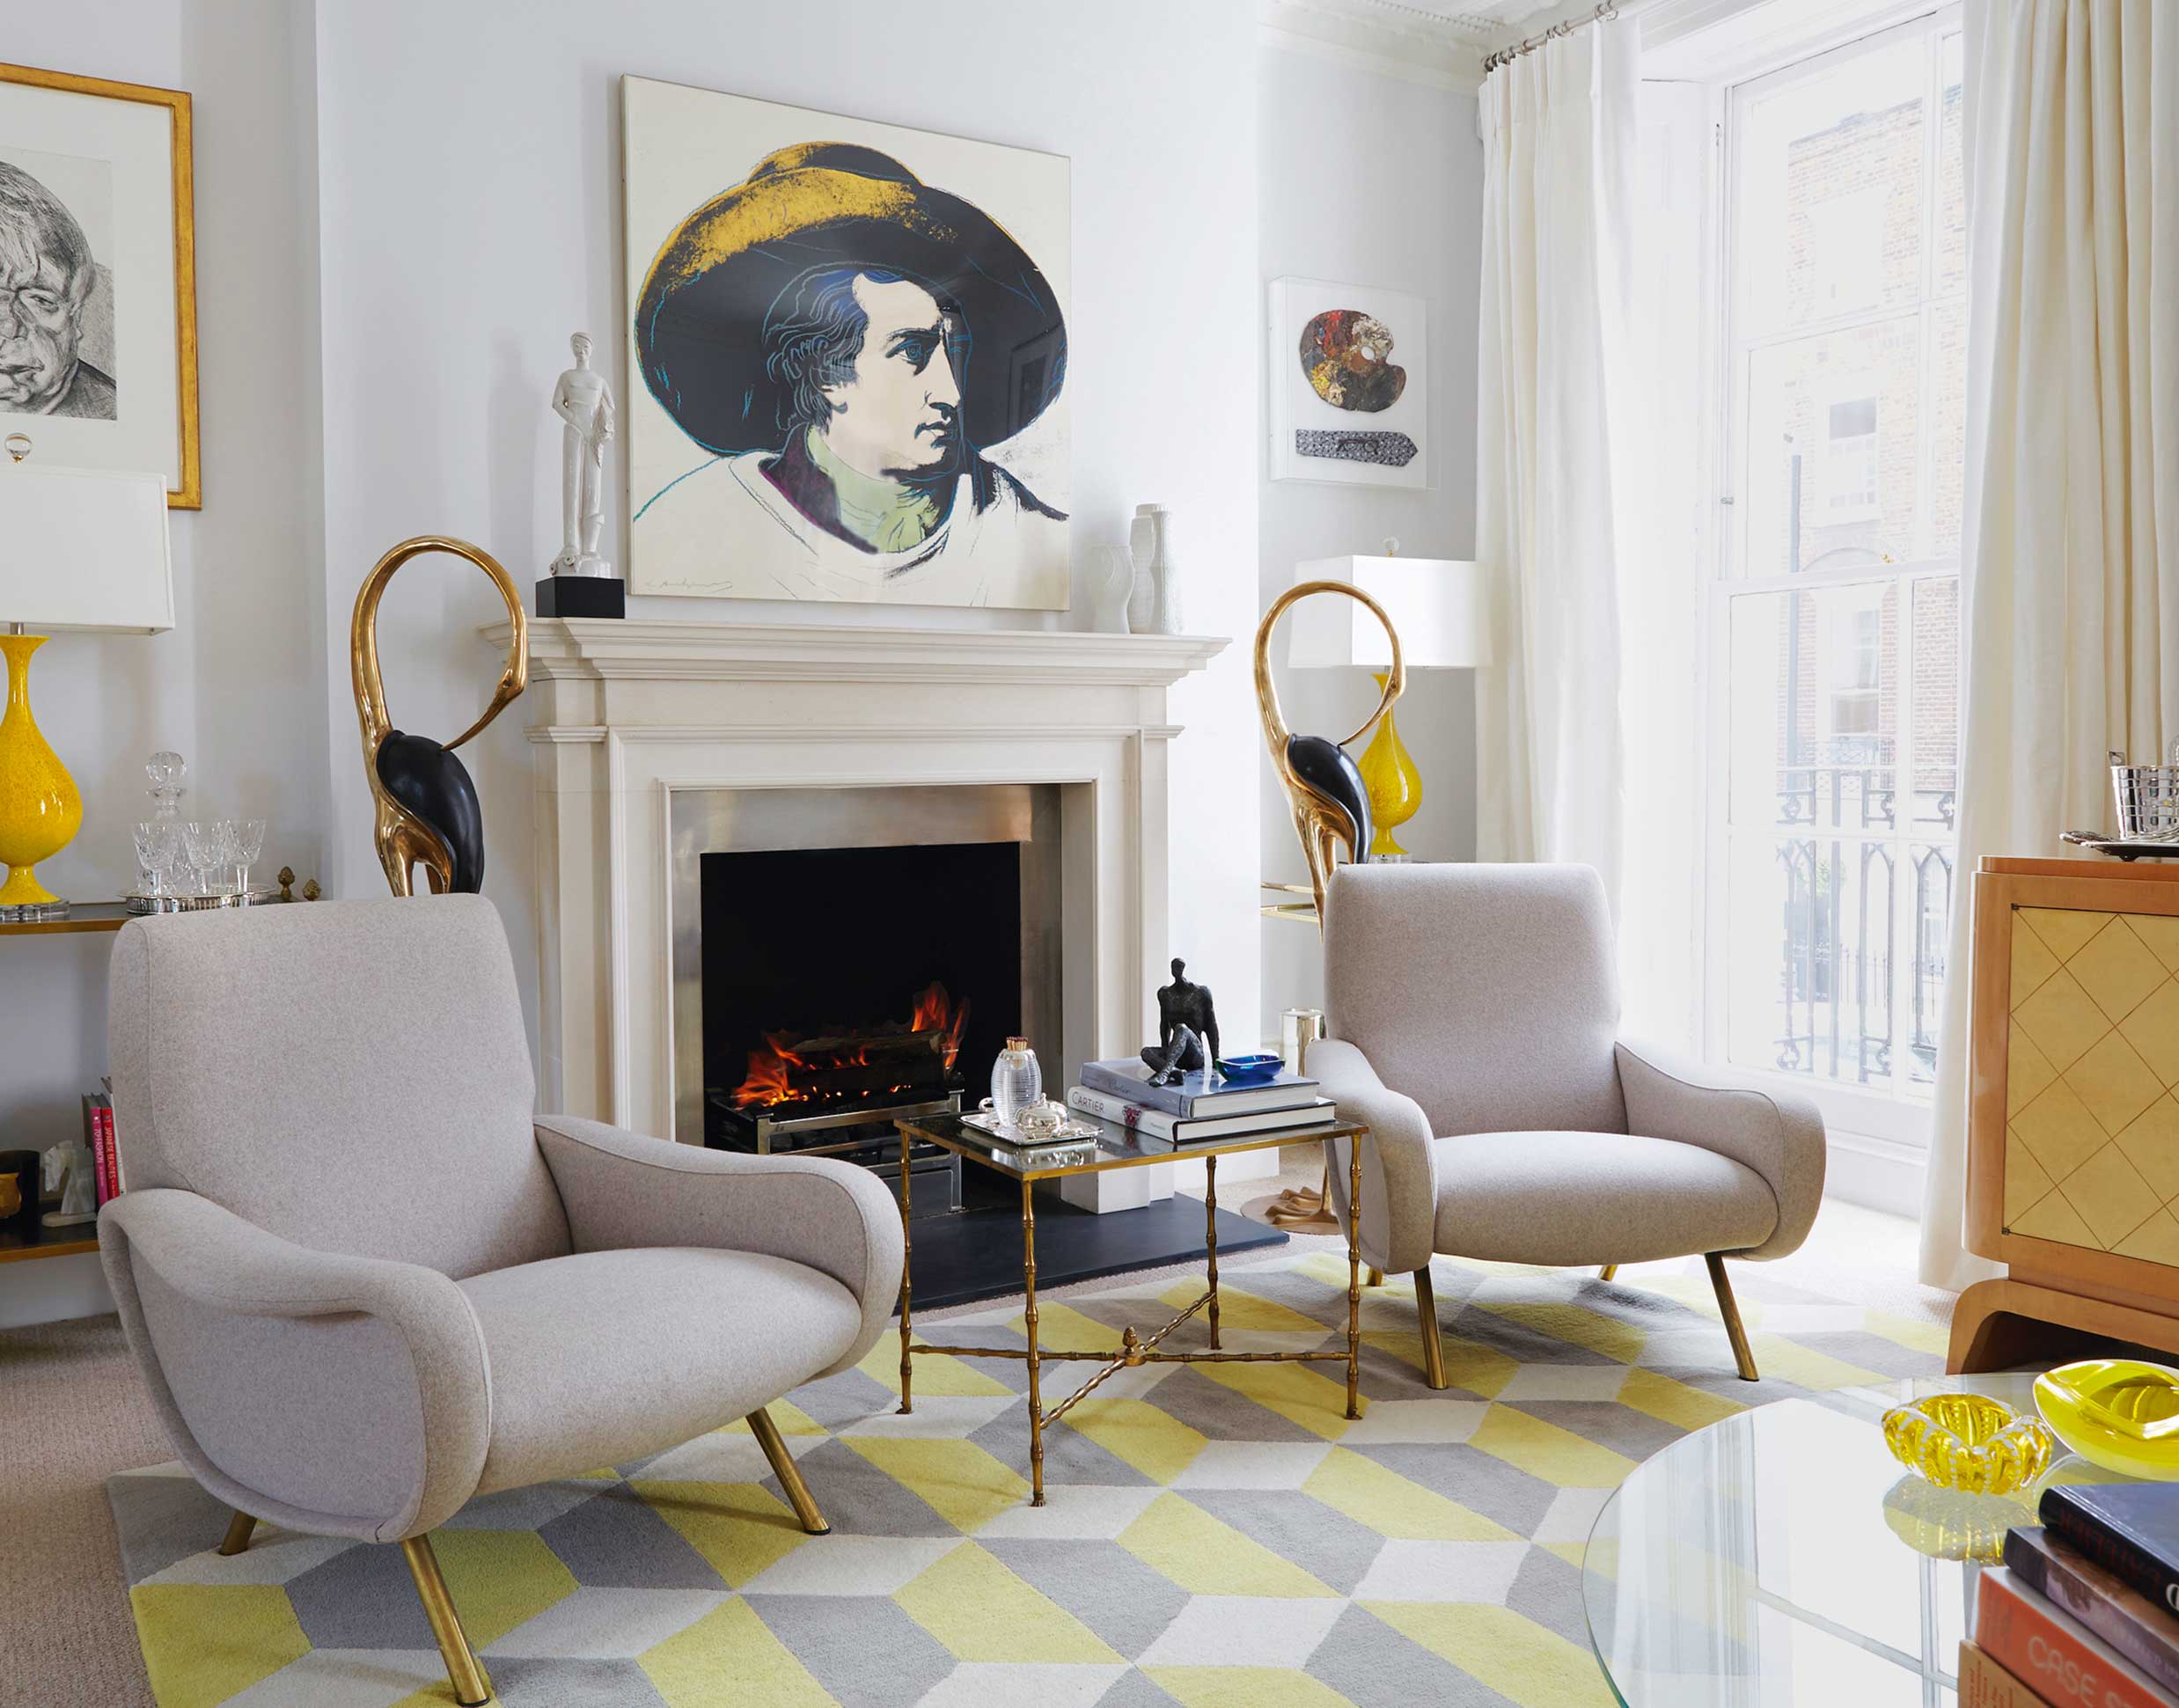 Belgravia Townhouse of Jeremy King and Lauren Gurvich King - By Jan Showers as featured in Interiors: The Greatest Rooms of the Century